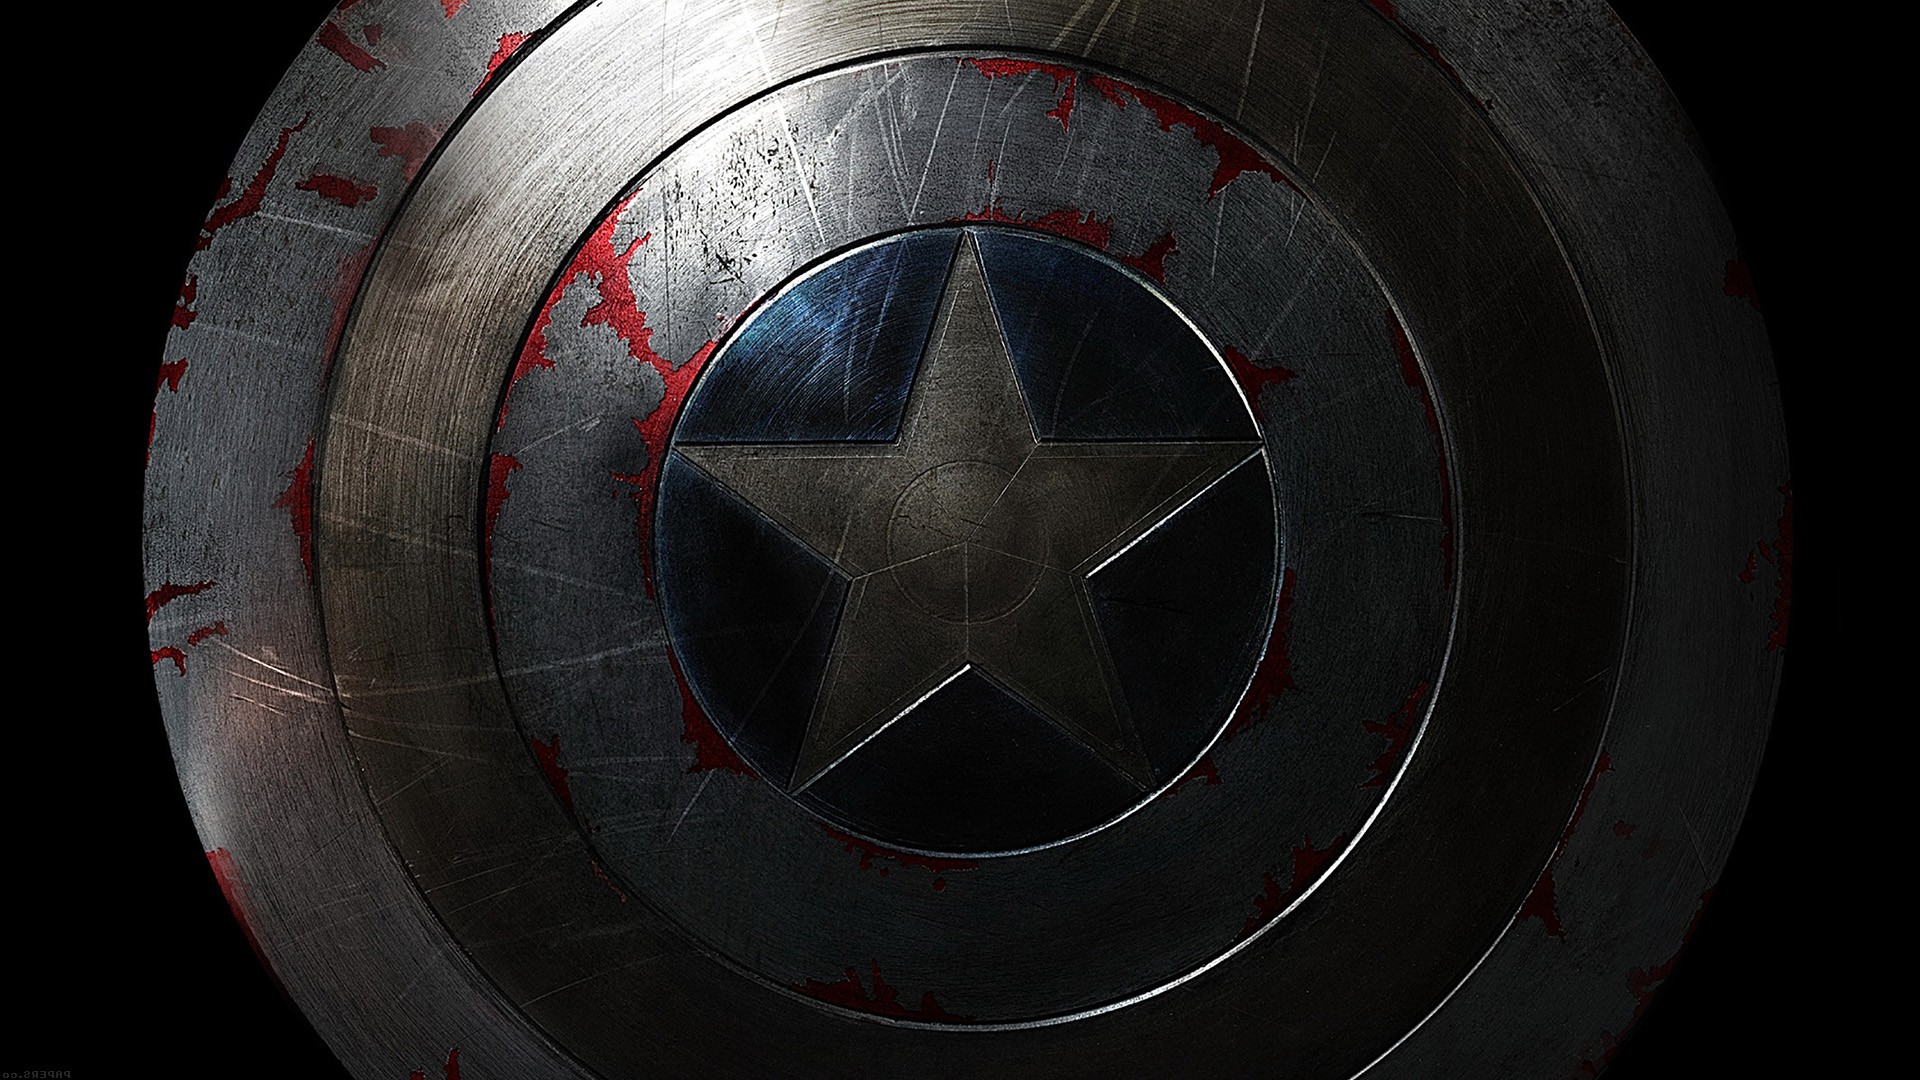 Marvelcom The Official Site for Marvel Movies